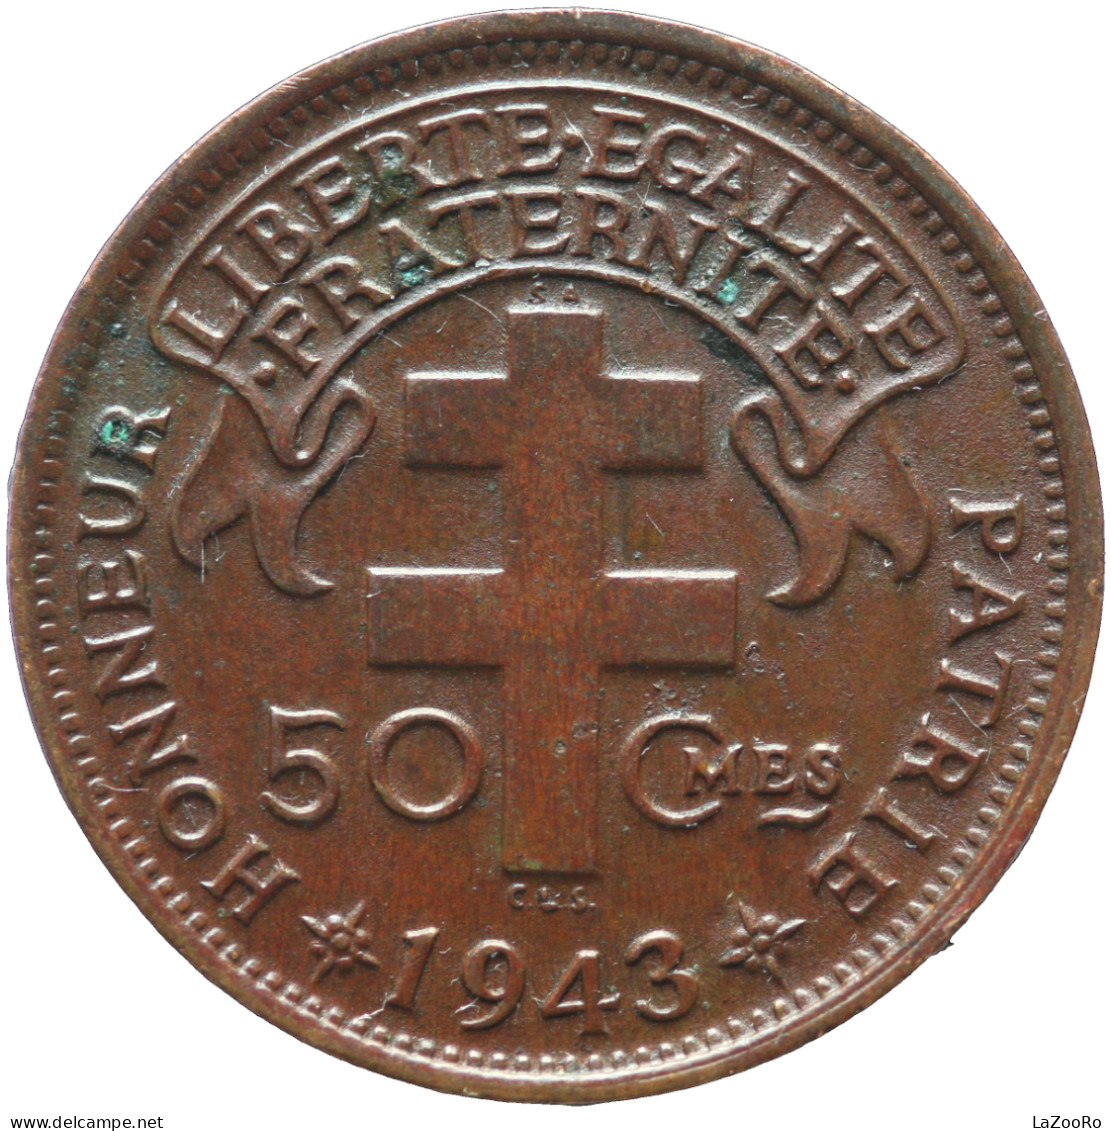 LaZooRo: French Equatorial Africa 50 Centimes 1943 SA UNC - French Equatorial Africa